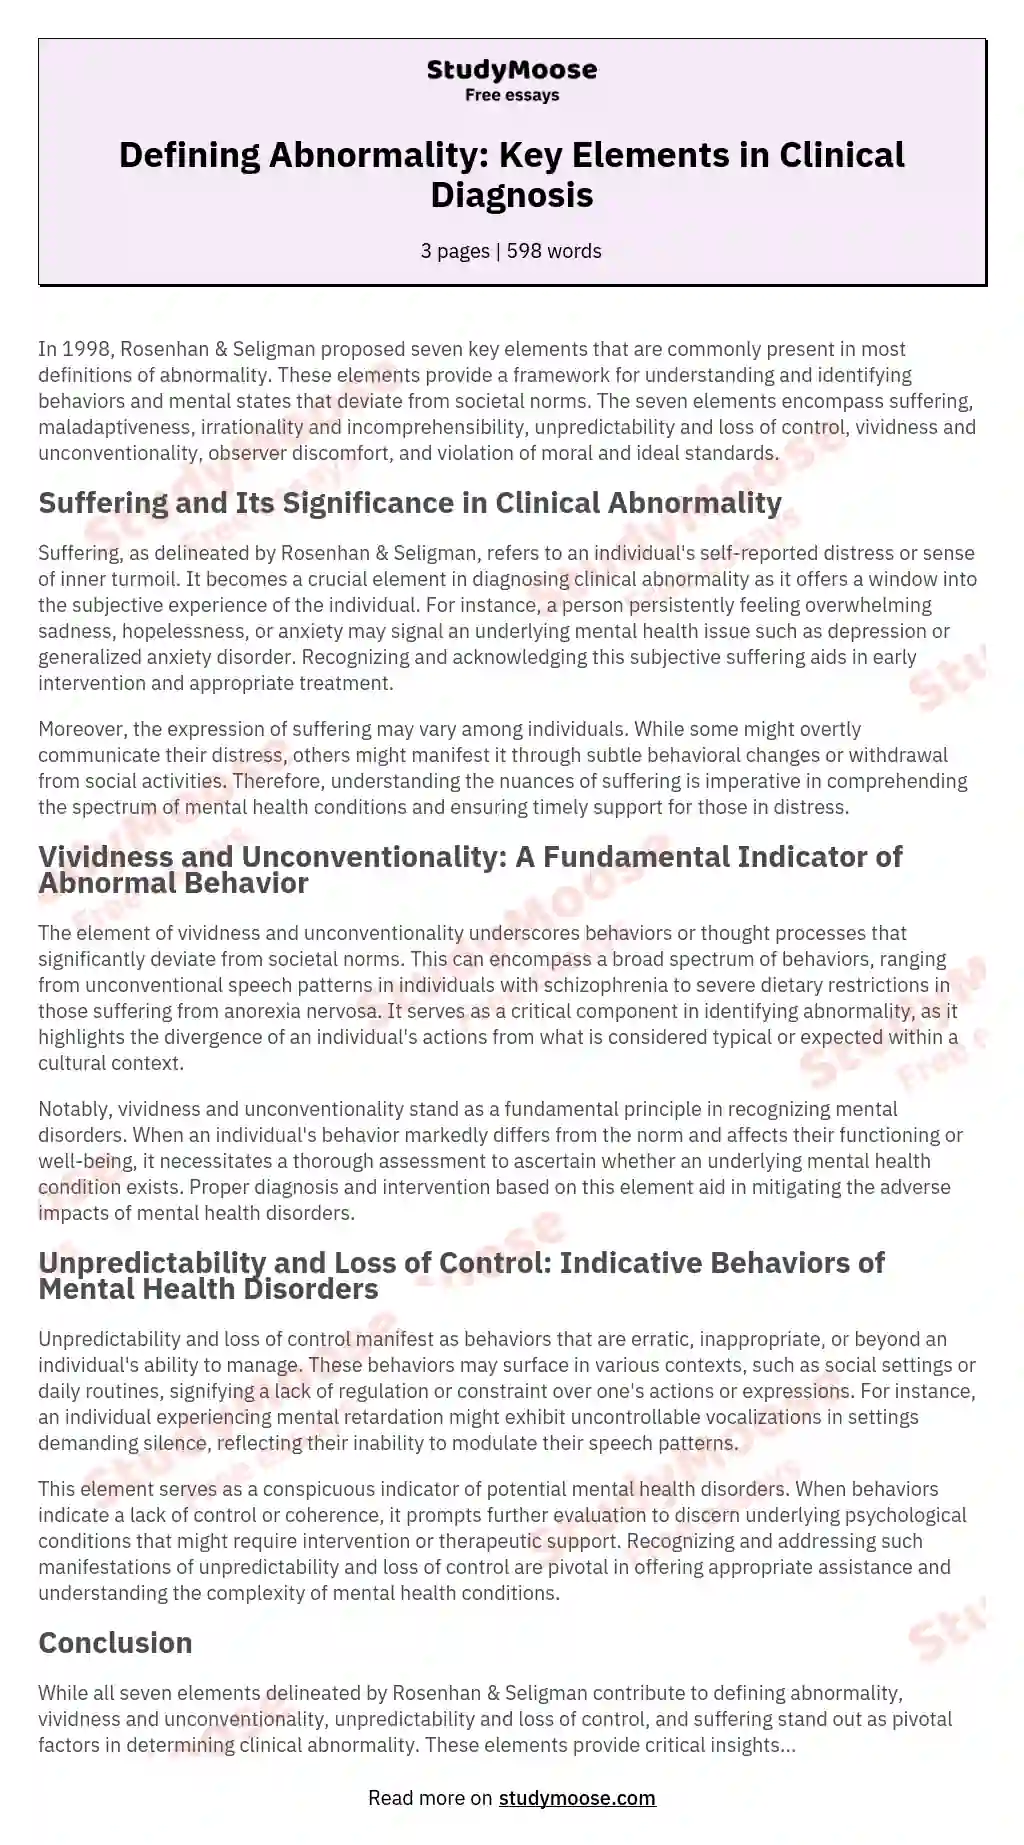 Defining Abnormality: Key Elements in Clinical Diagnosis essay